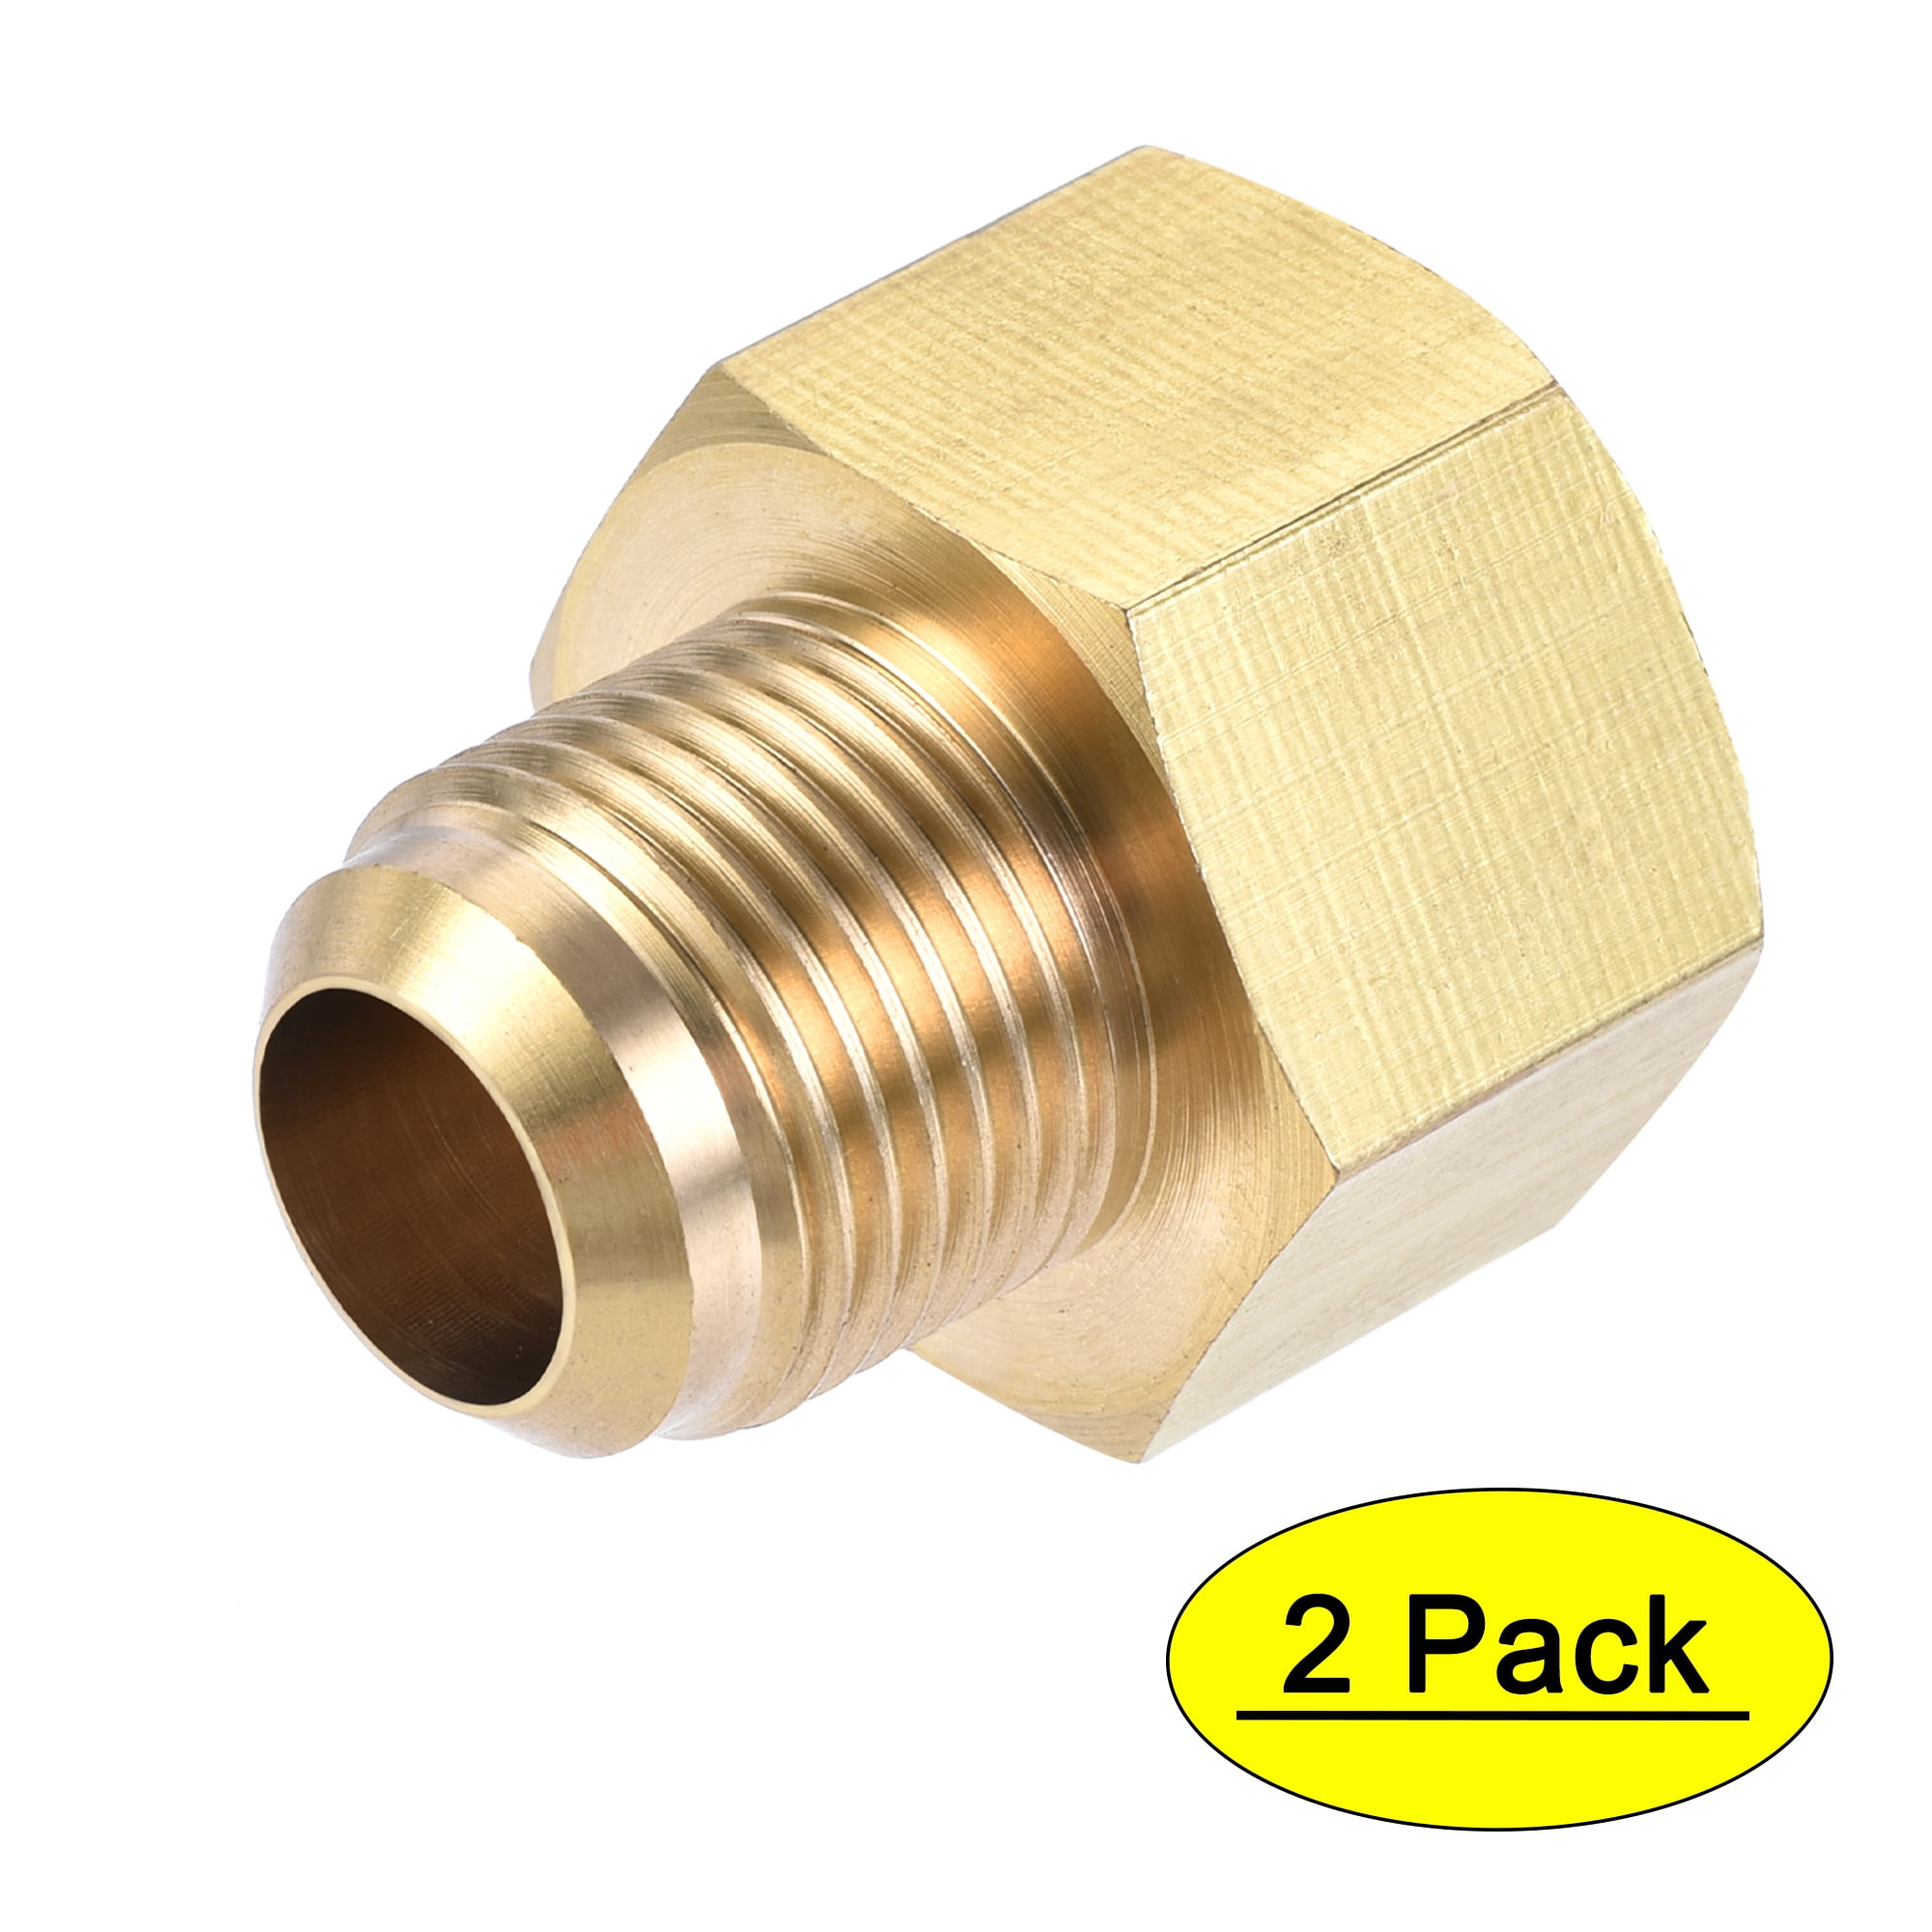 PROPANE FITTING REDUCING TEE 5/8" INLET  X 1/2 " X 1/2 " MALE FLARE 